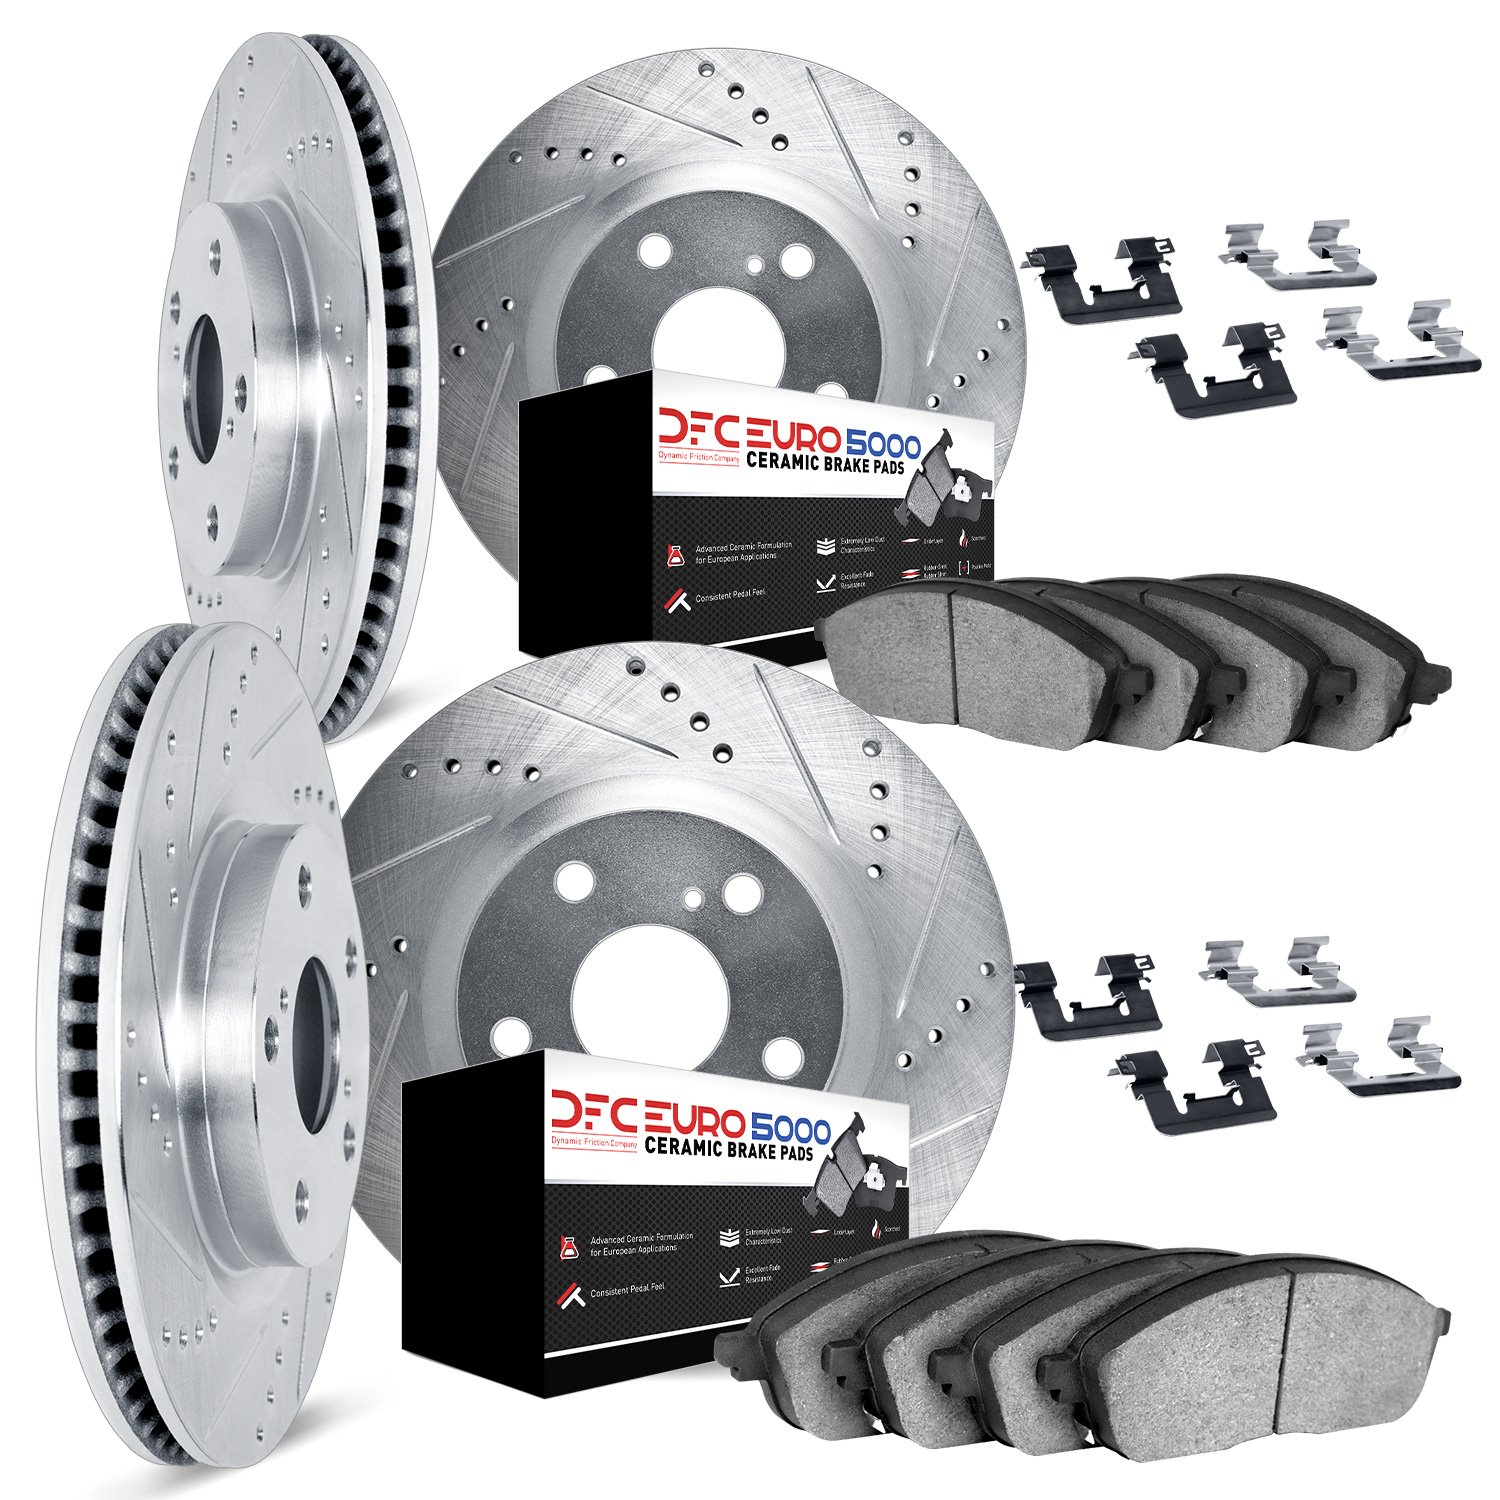 7614-31029 Drilled/Slotted Brake Rotors w/5000 Euro Ceramic Brake Pads Kit & Hardware [Silver], 2011-2016 BMW, Position: Front a